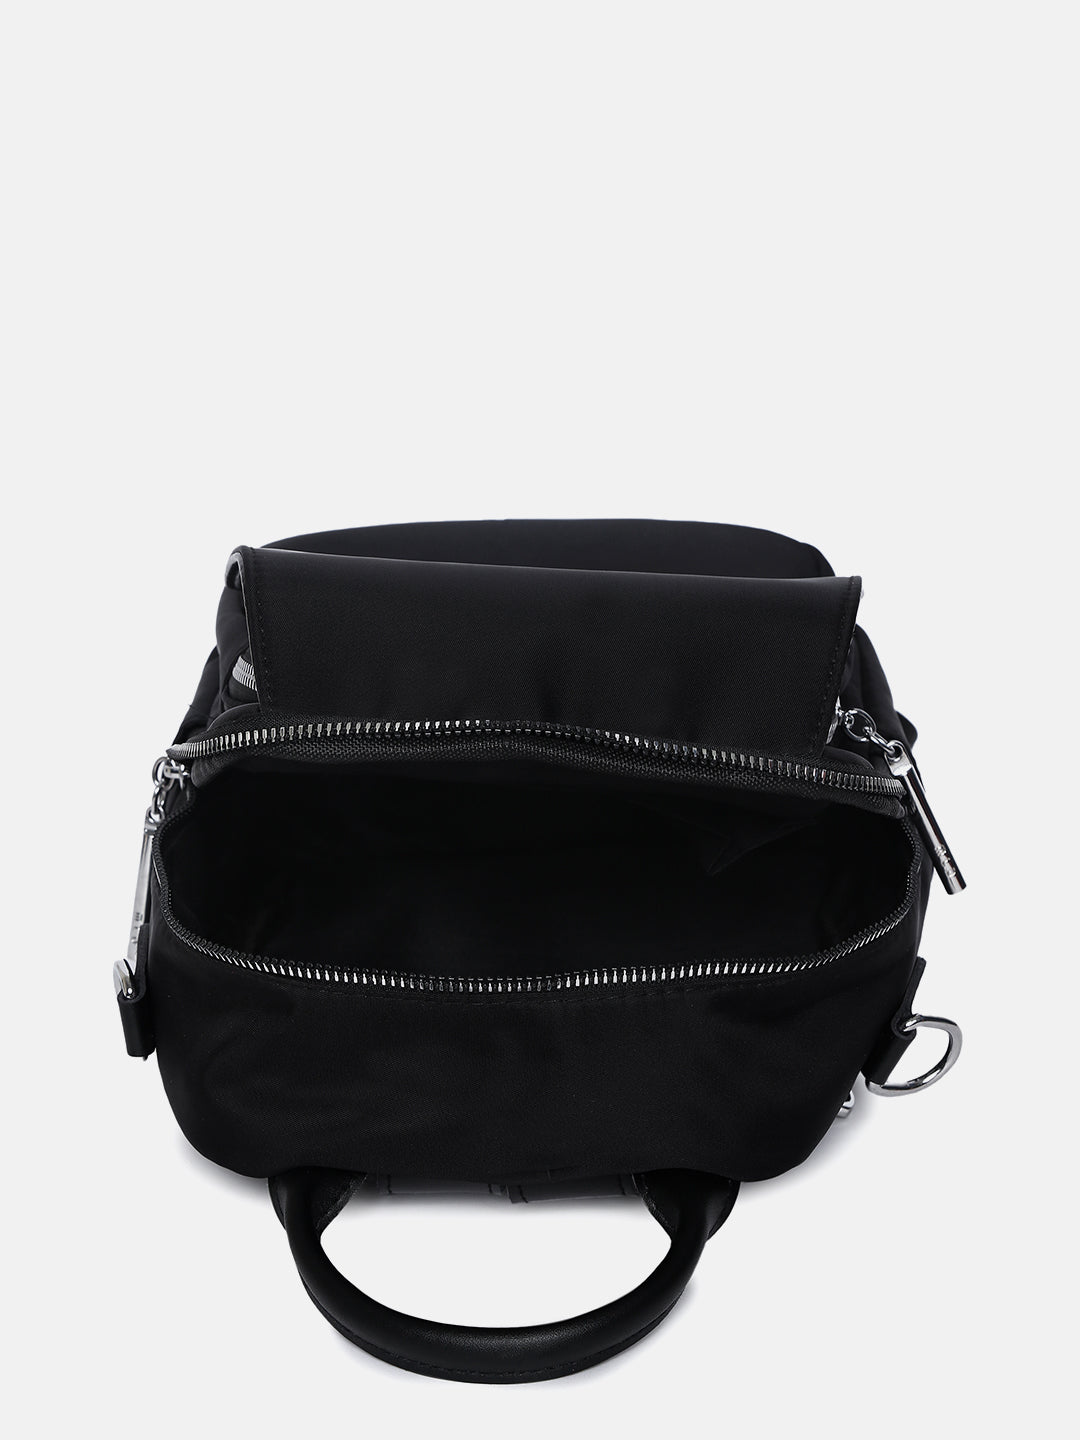 On-The-Go Glamour Backpack